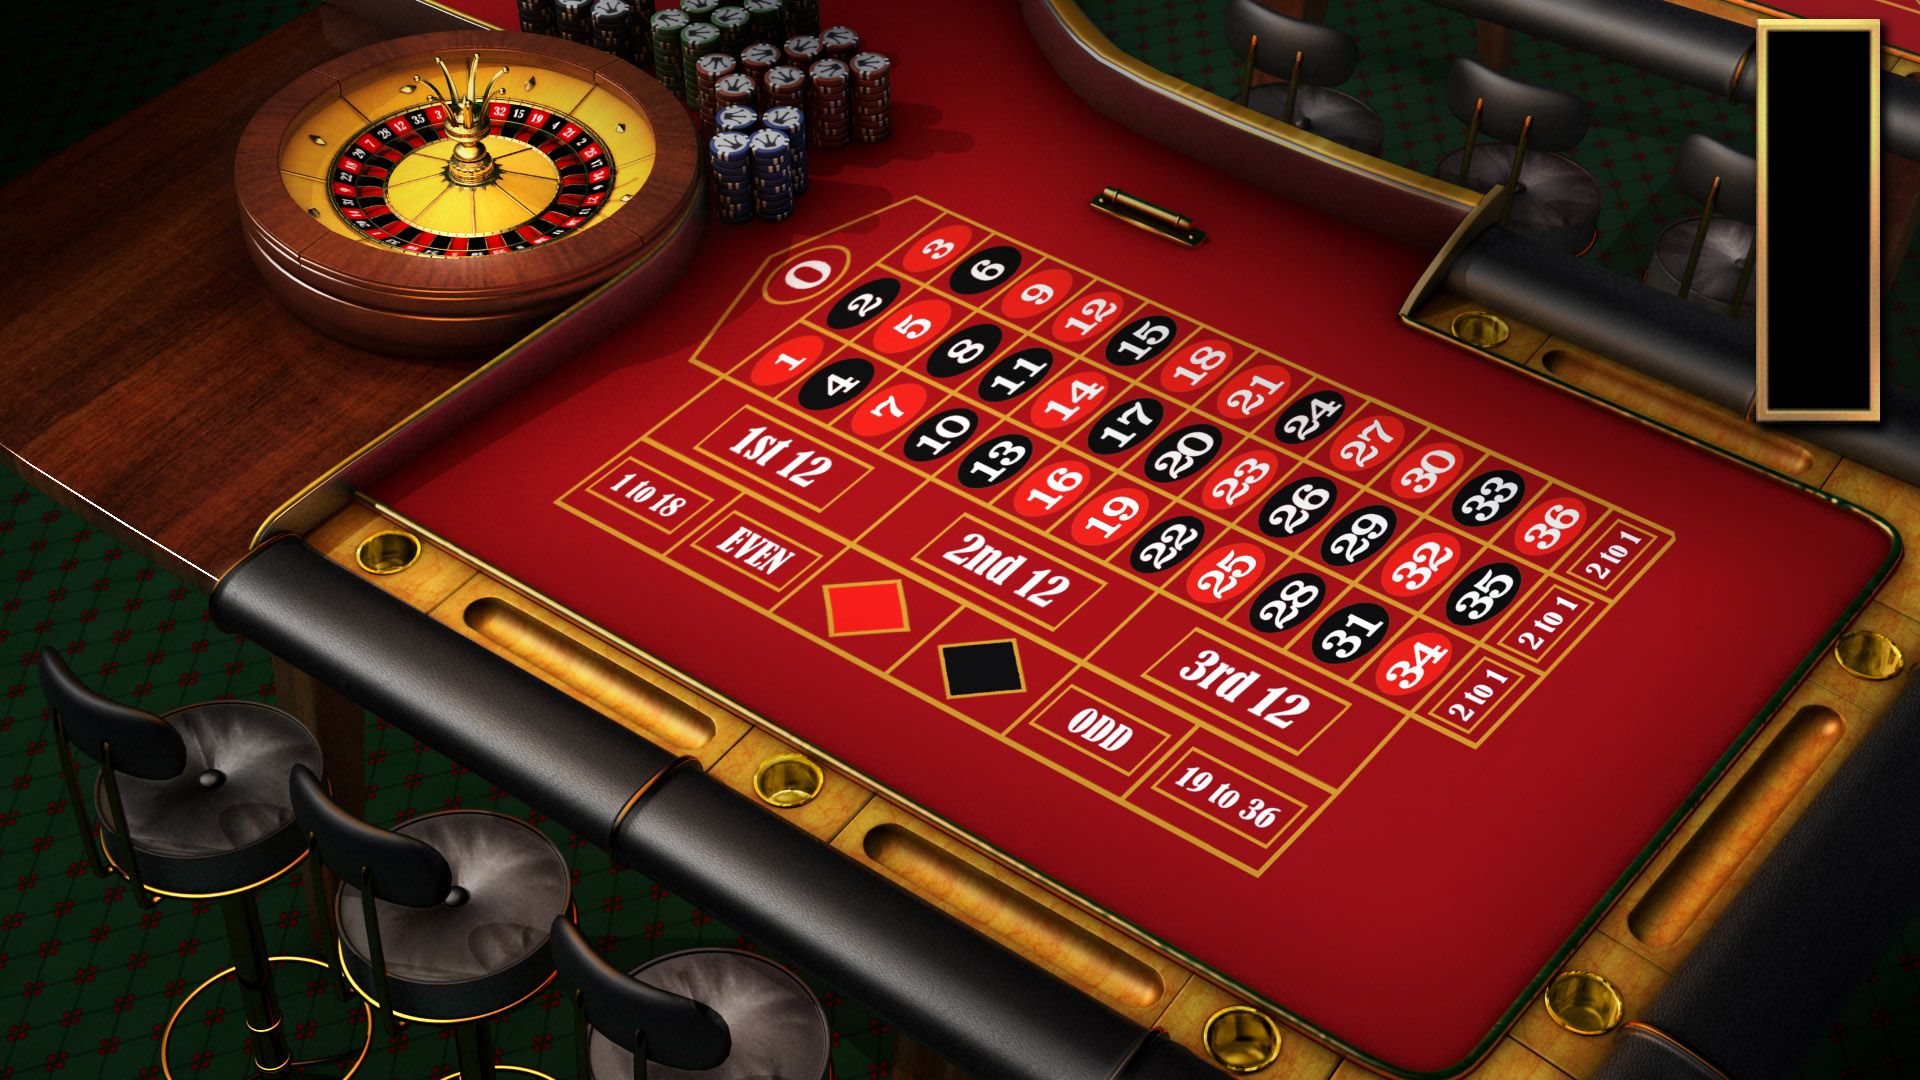 Enjoy games to the fullest with online slot sites